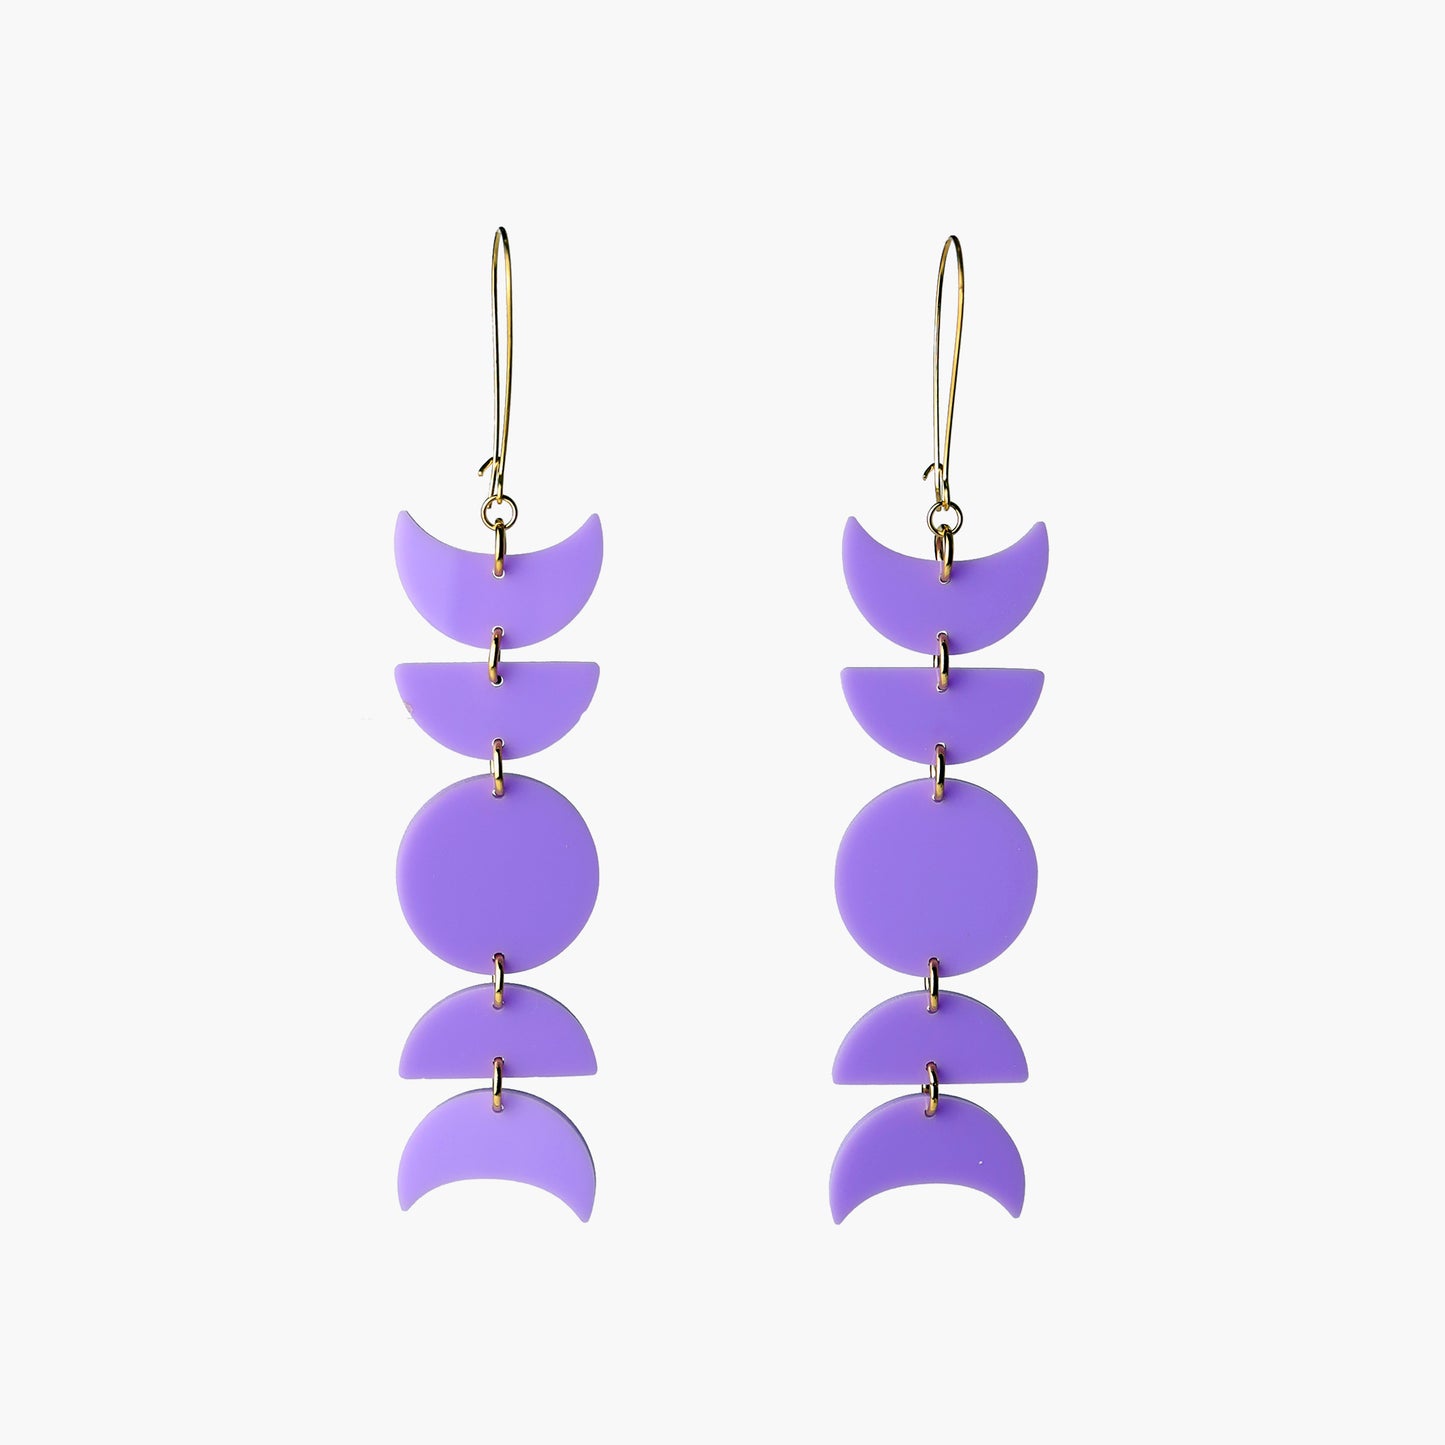 Front view image of Indi City Moonphase Earrings in purple acrylic. These long drop earrings beautifully capture a fusion of cultural and contemporary styles, symbolizing the ever-changing phases of the moon.